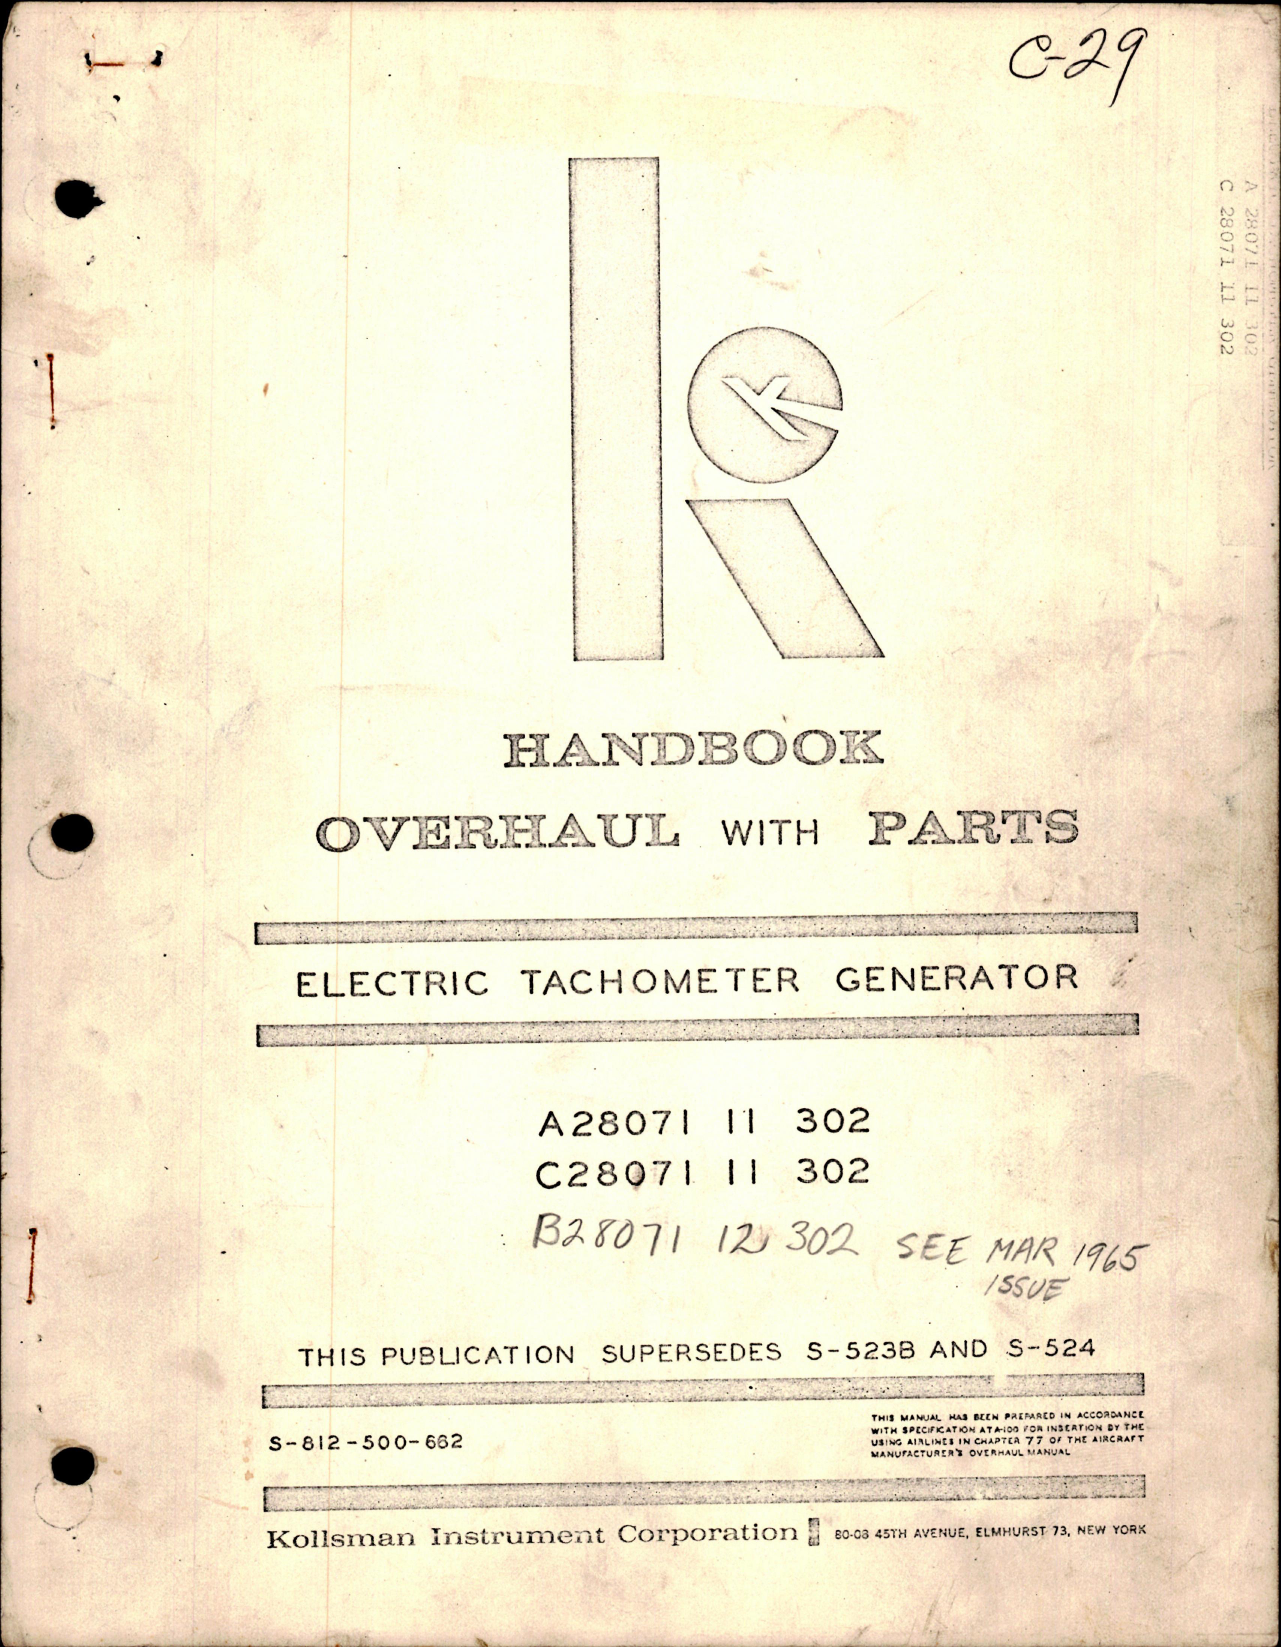 Sample page 1 from AirCorps Library document: Overhaul Instructions with Parts for Electric Tachometer Generator - Parts A28071 11 302 and C28071 11 302